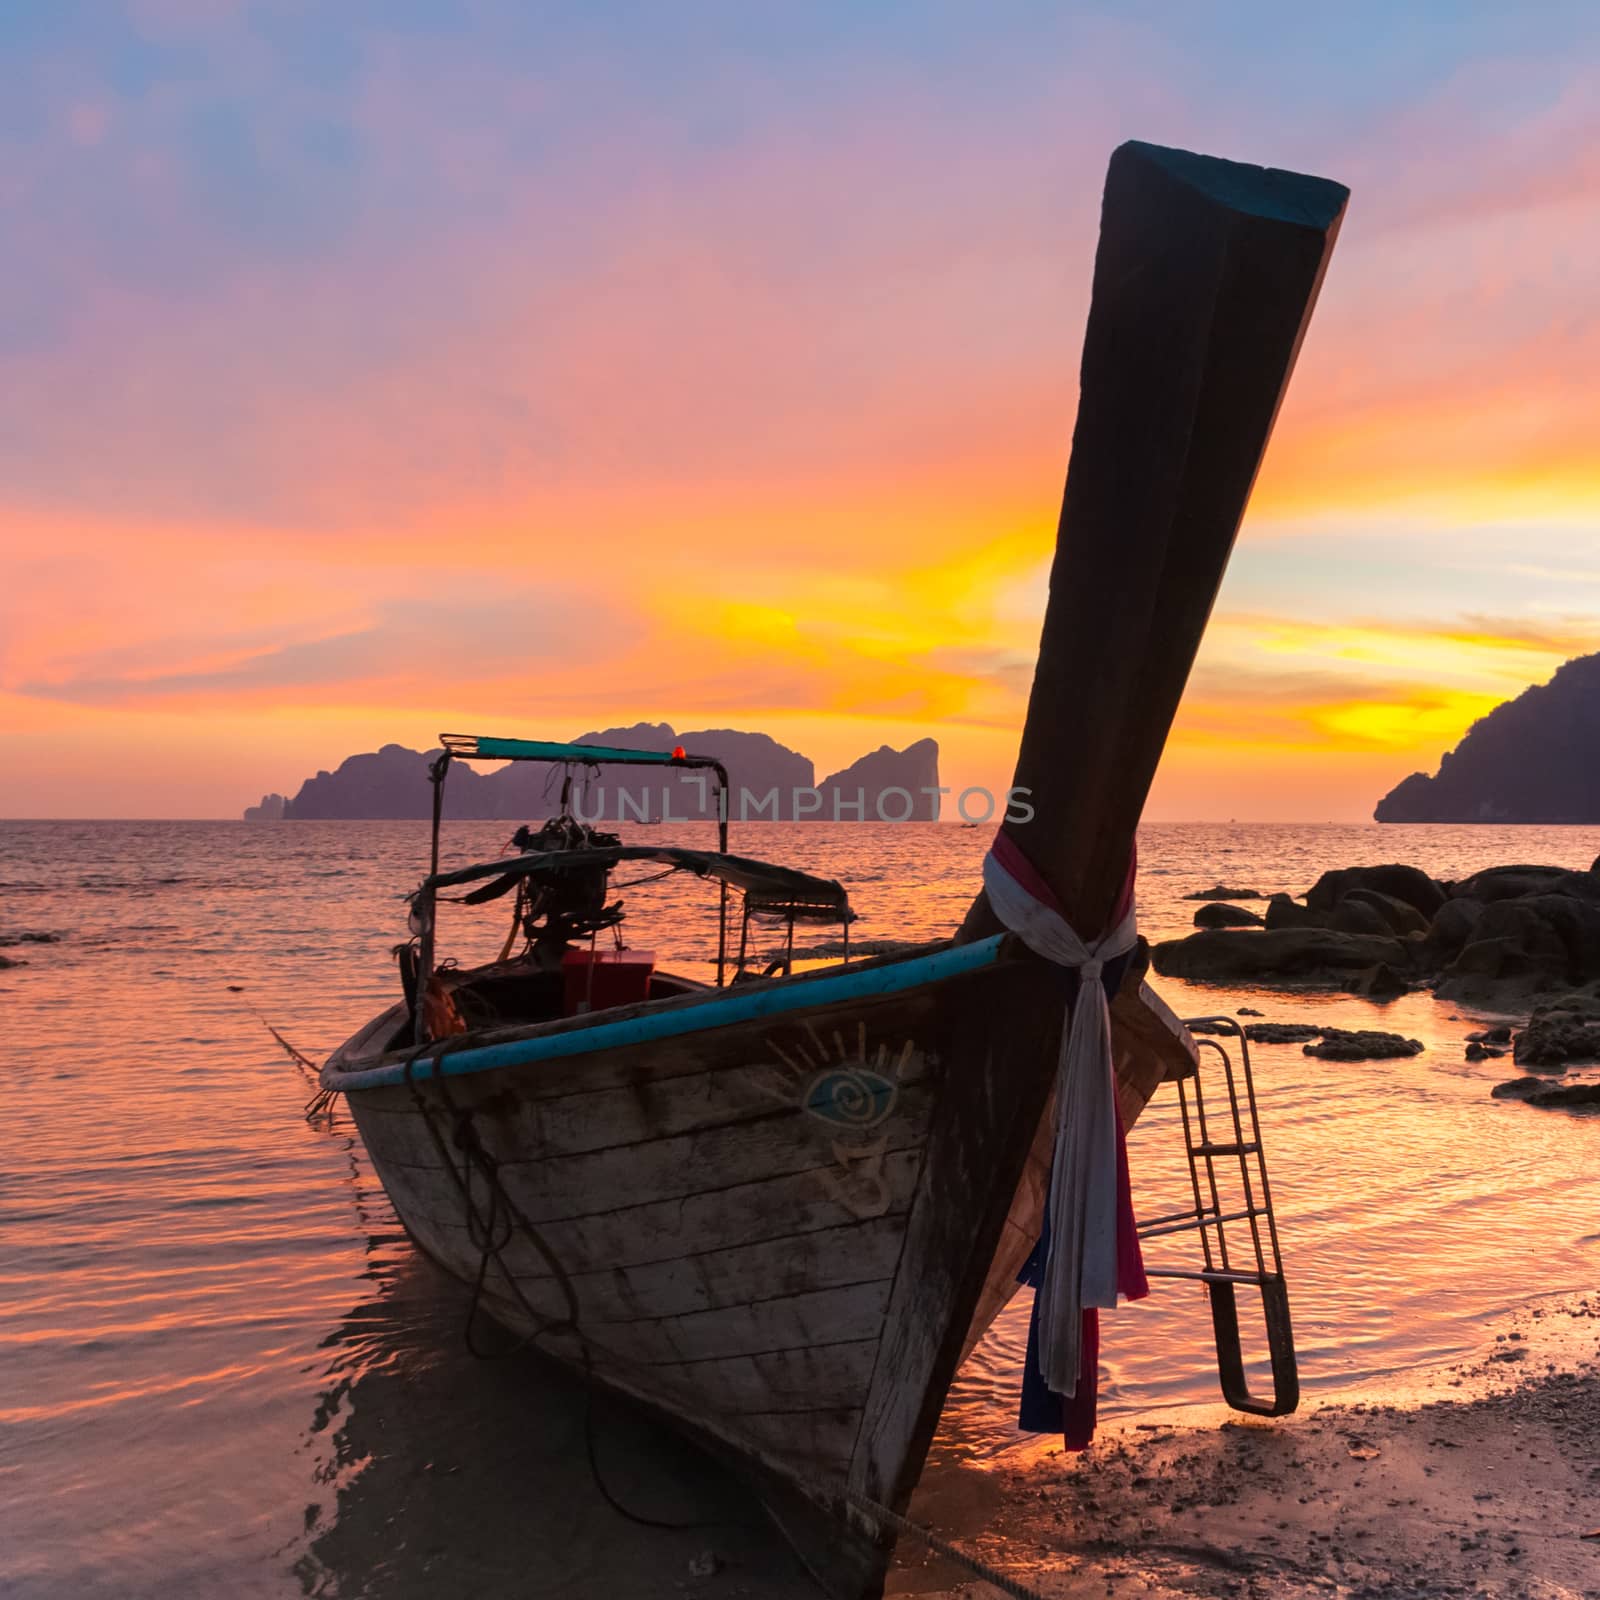 Traditional thai wooden longtail boat on beach of Phi-Phi Don island in sunset. Silhouette of famous Phi Phi Lee island in background. Thailand, Krabi province.